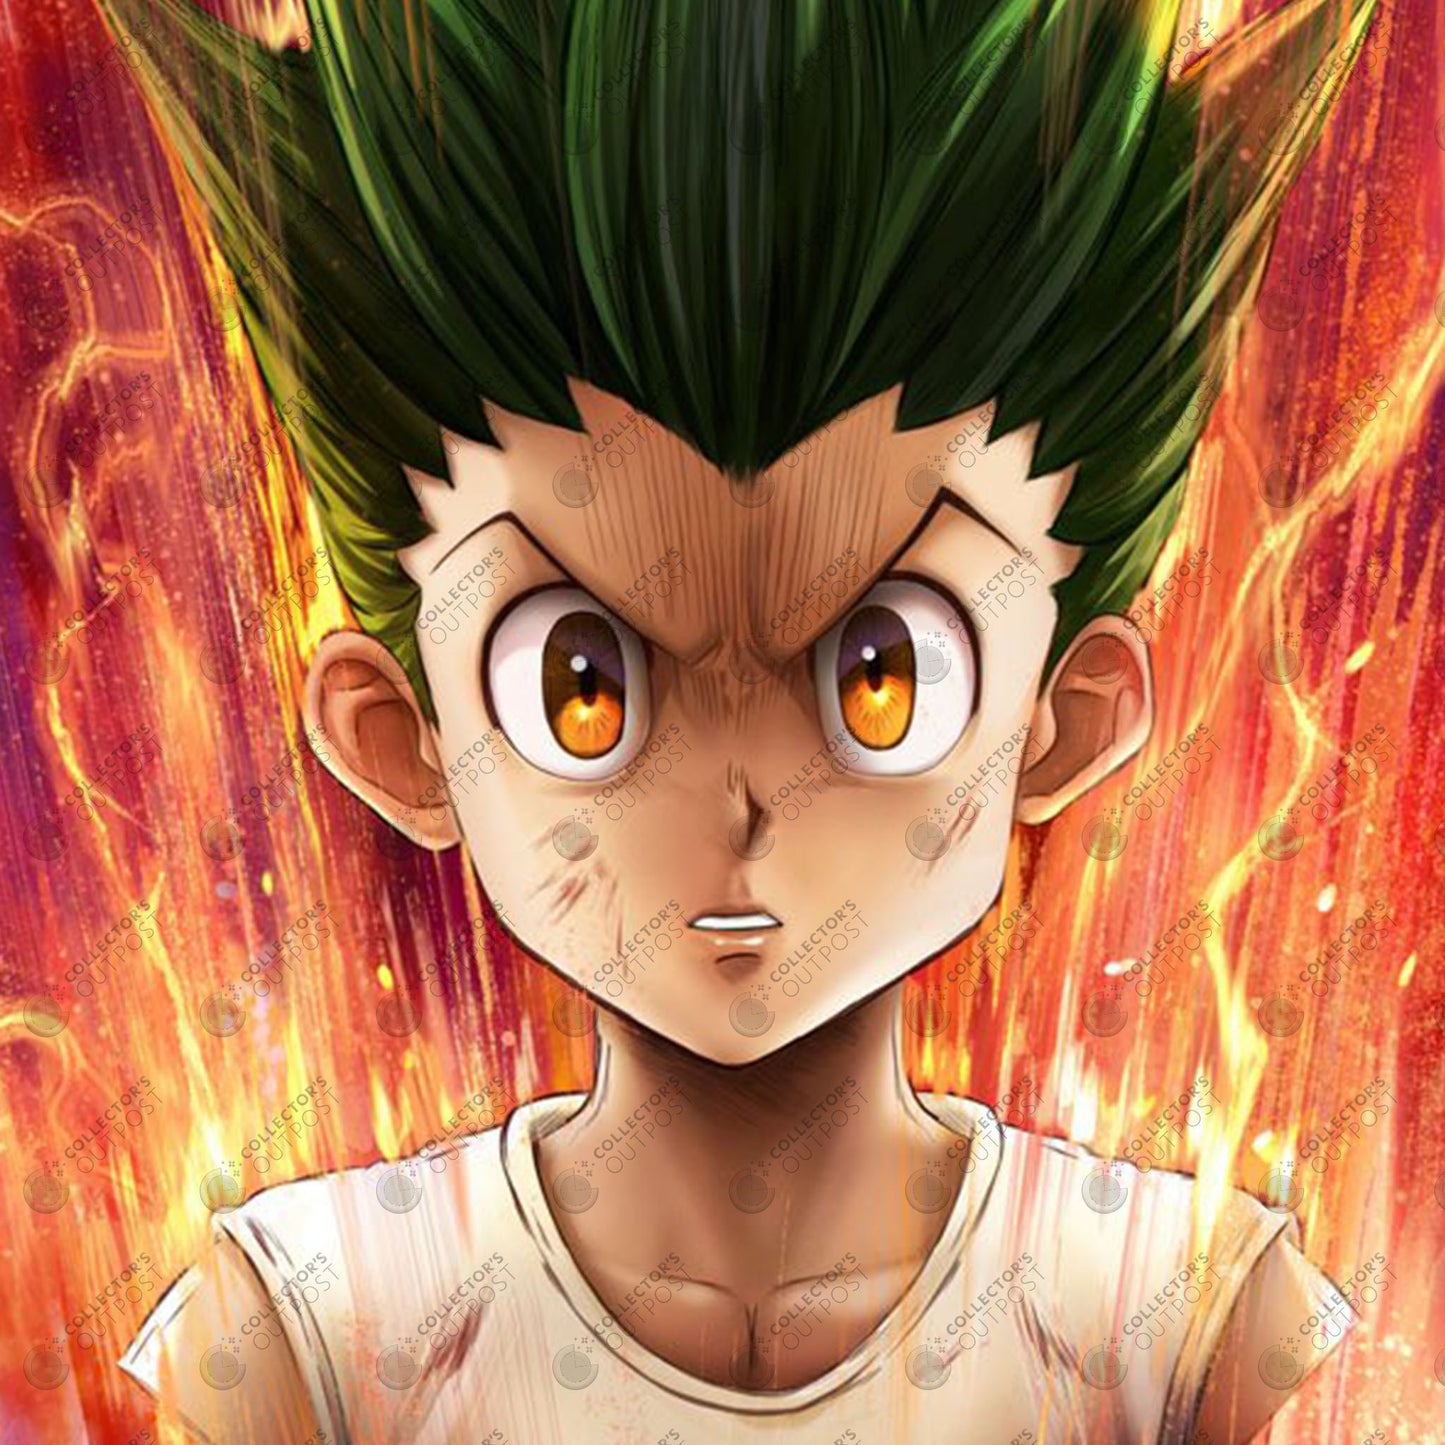 Hunter x Hunter Picture - Image Abyss